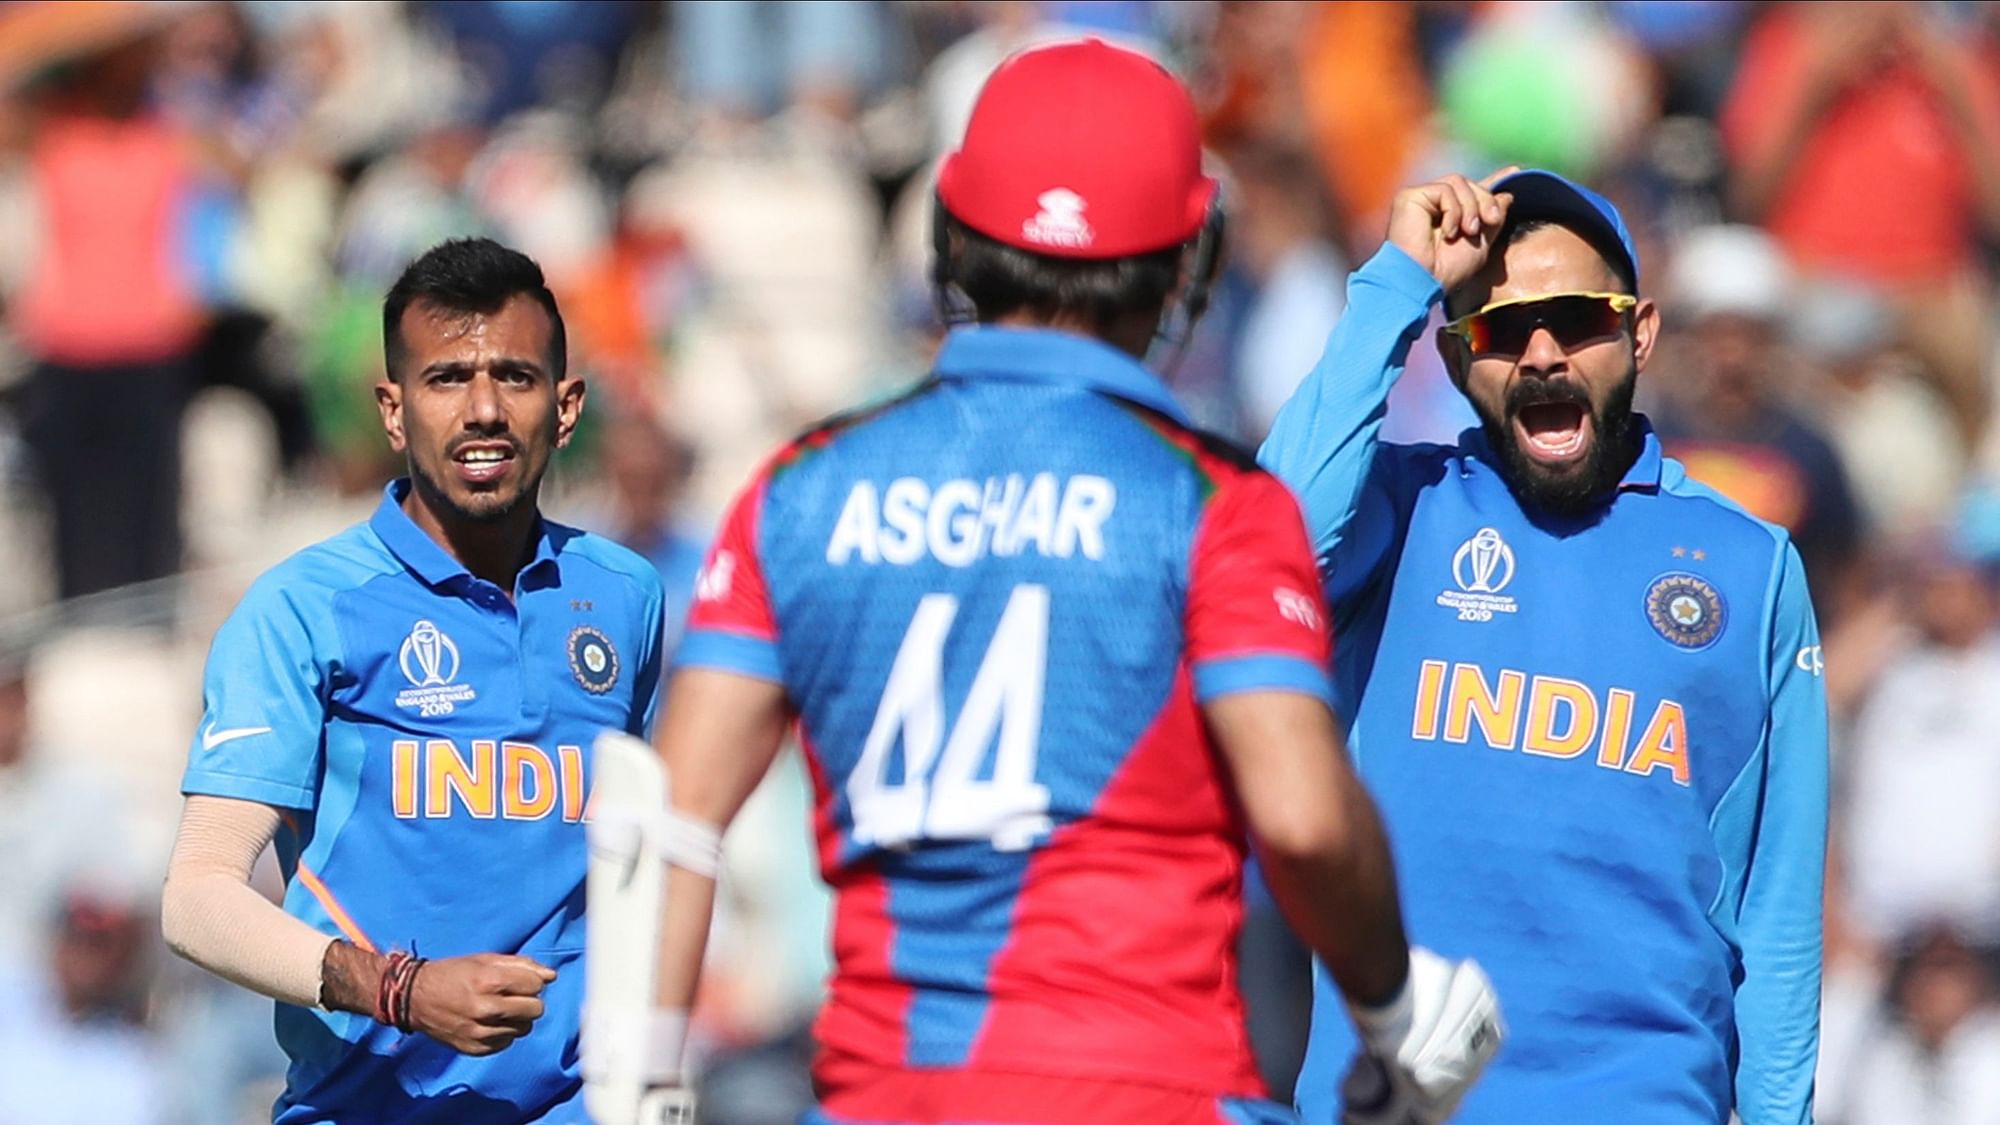 India beat Afghanistan by 11 runs in the ICC World Cup.